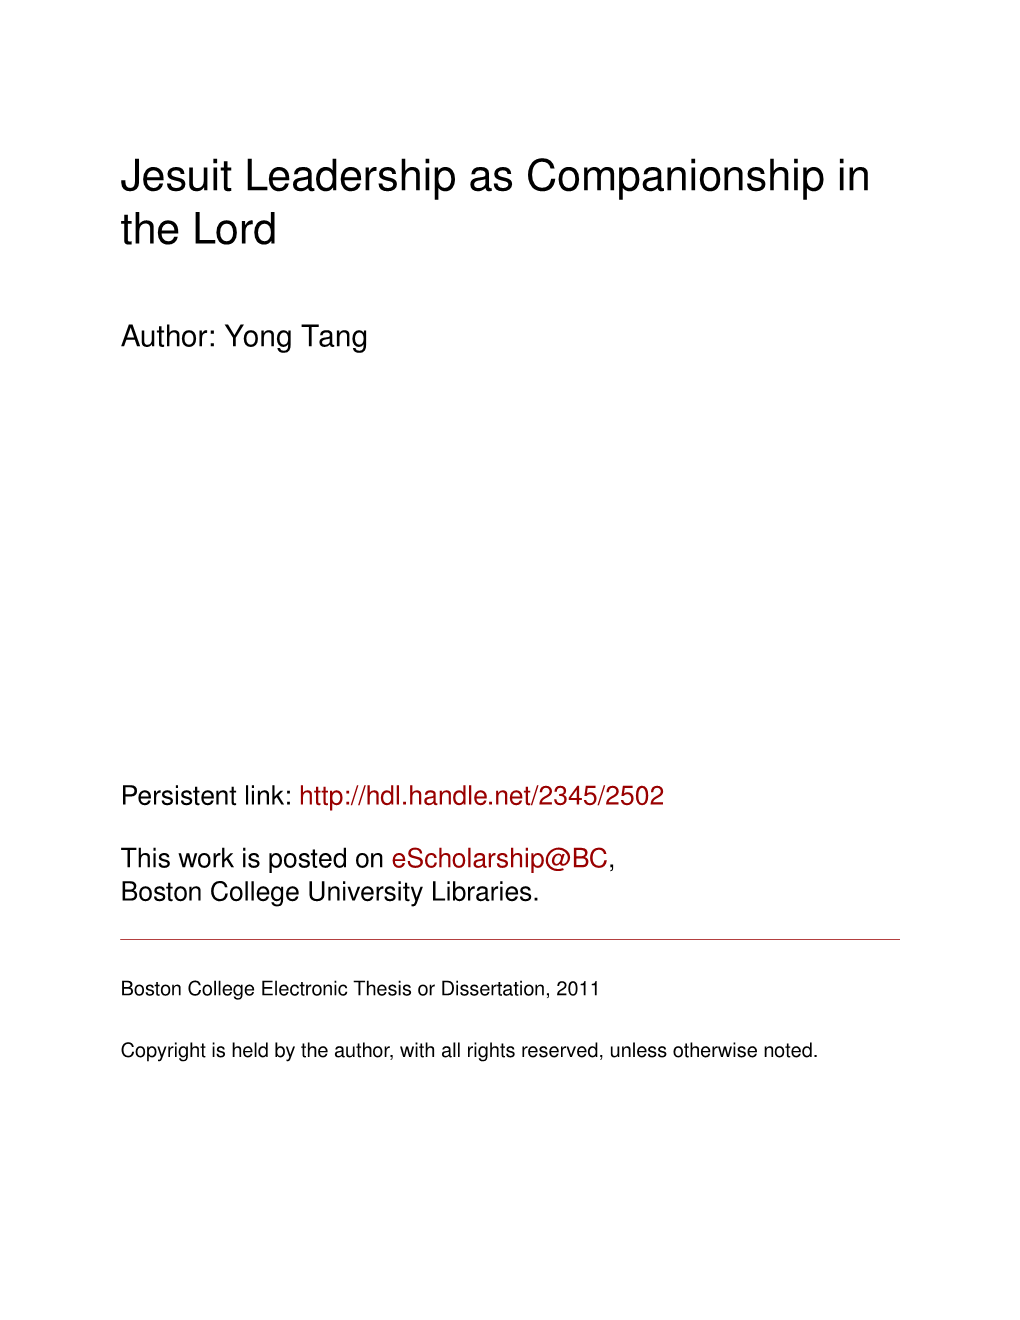 Jesuit Leadership As Companionship in the Lord